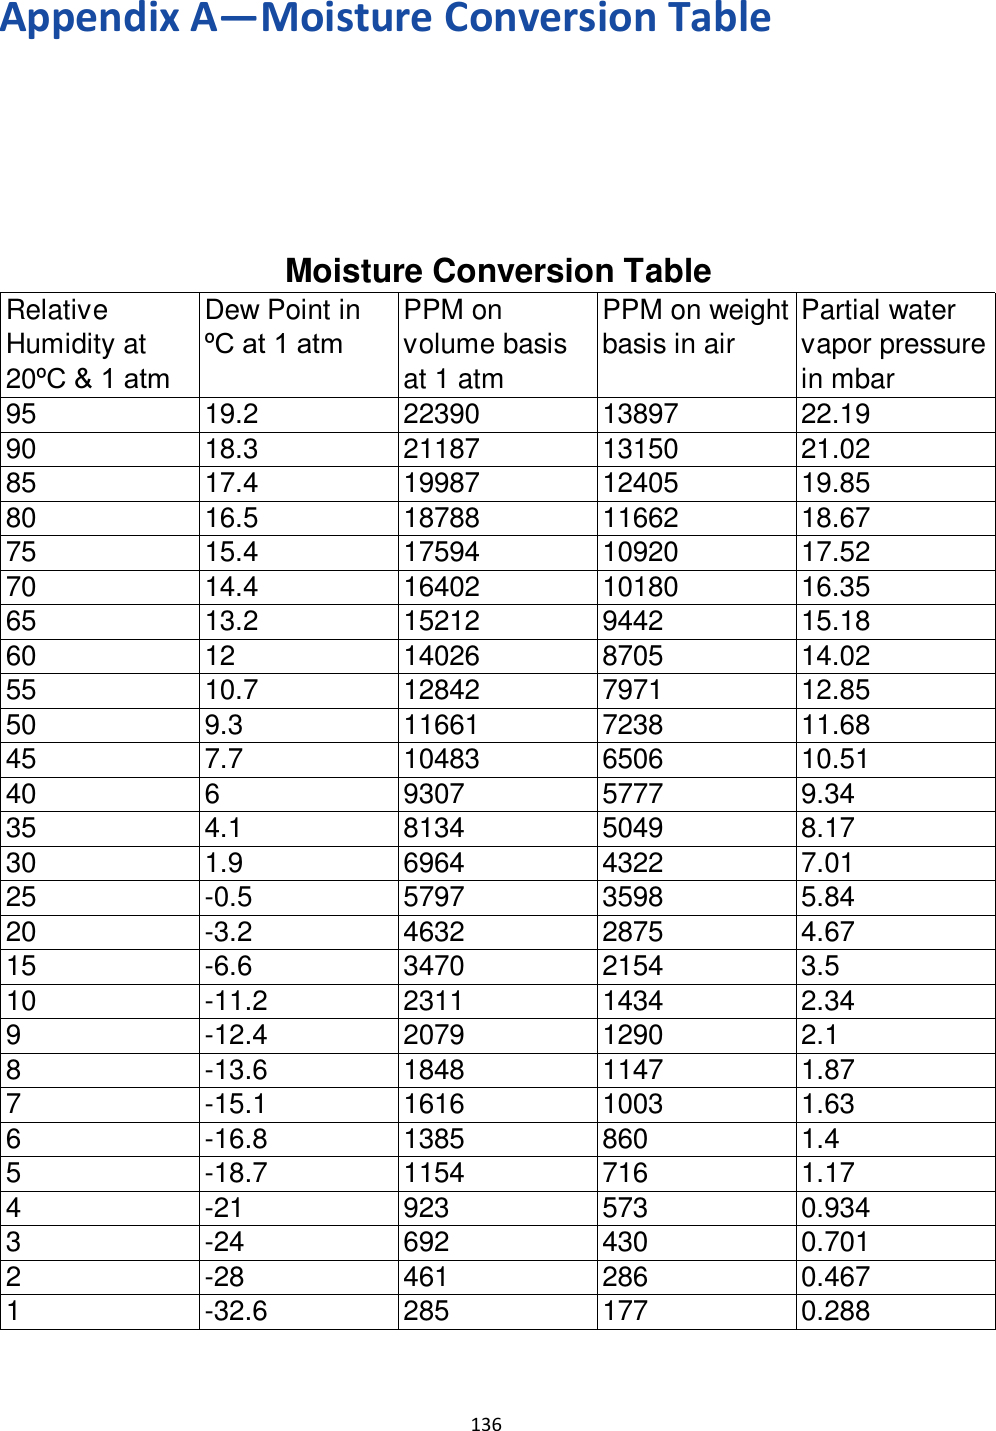   136   Appendix A—Moisture Conversion Table        Relative Humidity at 20ºC &amp; 1 atmDew Point in ºC at 1 atmPPM on volume basis at 1 atmPPM on weight basis in airPartial water vapor pressure in mbar95 19.2 22390 13897 22.1990 18.3 21187 13150 21.0285 17.4 19987 12405 19.8580 16.5 18788 11662 18.6775 15.4 17594 10920 17.5270 14.4 16402 10180 16.3565 13.2 15212 9442 15.1860 12 14026 8705 14.0255 10.7 12842 7971 12.8550 9.3 11661 7238 11.6845 7.7 10483 6506 10.5140 69307 5777 9.3435 4.1 8134 5049 8.1730 1.9 6964 4322 7.0125 -0.5 5797 3598 5.8420 -3.2 4632 2875 4.6715 -6.6 3470 2154 3.510 -11.2 2311 1434 2.349 -12.4 2079 1290 2.18 -13.6 1848 1147 1.877 -15.1 1616 1003 1.636 -16.8 1385 860 1.45 -18.7 1154 716 1.174 -21 923 573 0.9343 -24 692 430 0.7012 -28 461 286 0.4671 -32.6 285 177 0.288Moisture Conversion Table  